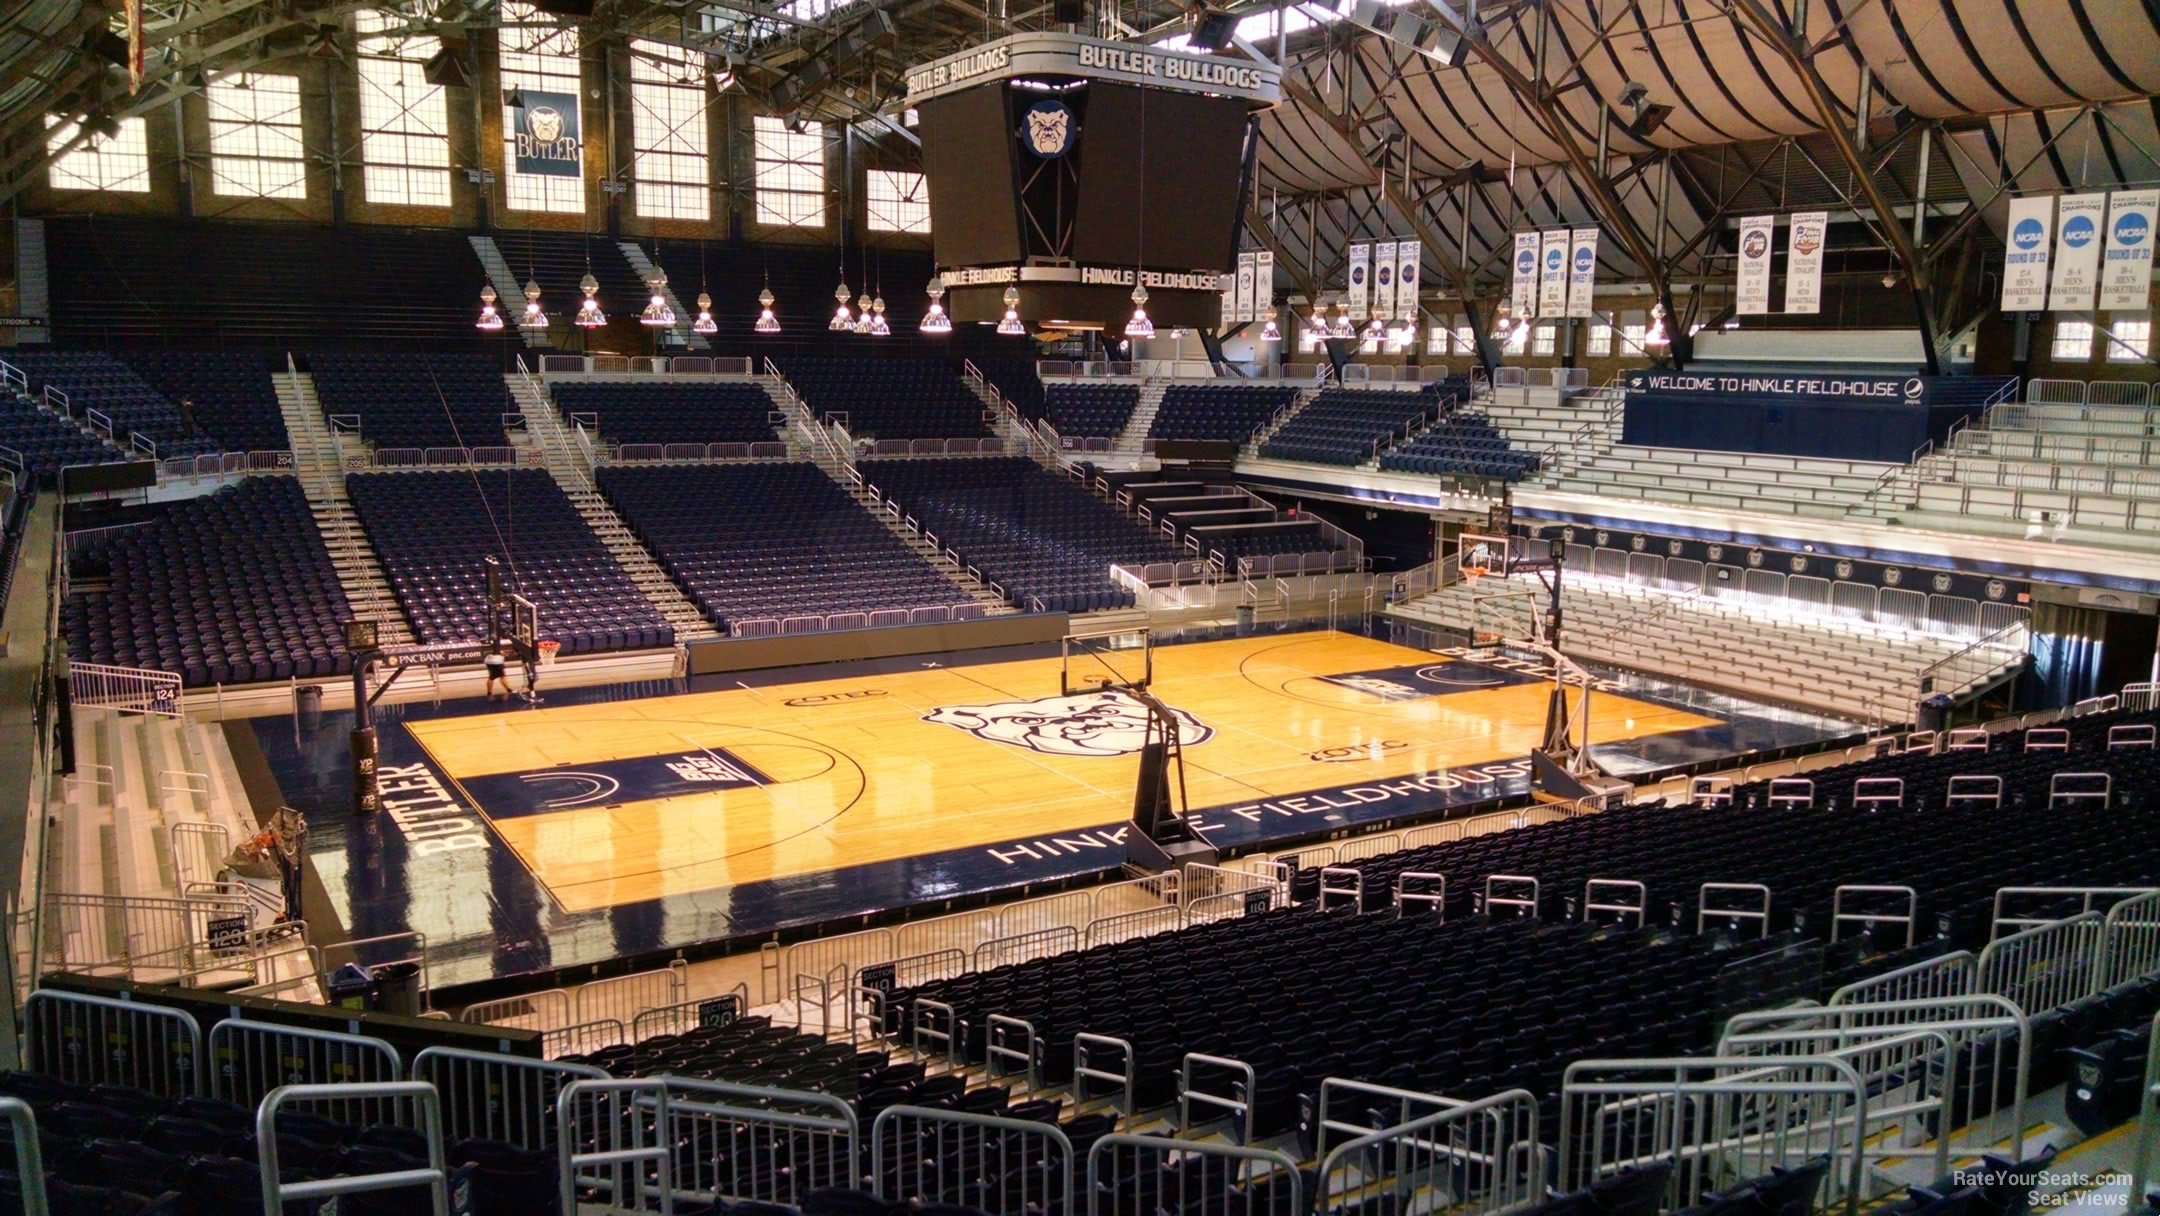 section 220, row 10 seat view  - hinkle fieldhouse